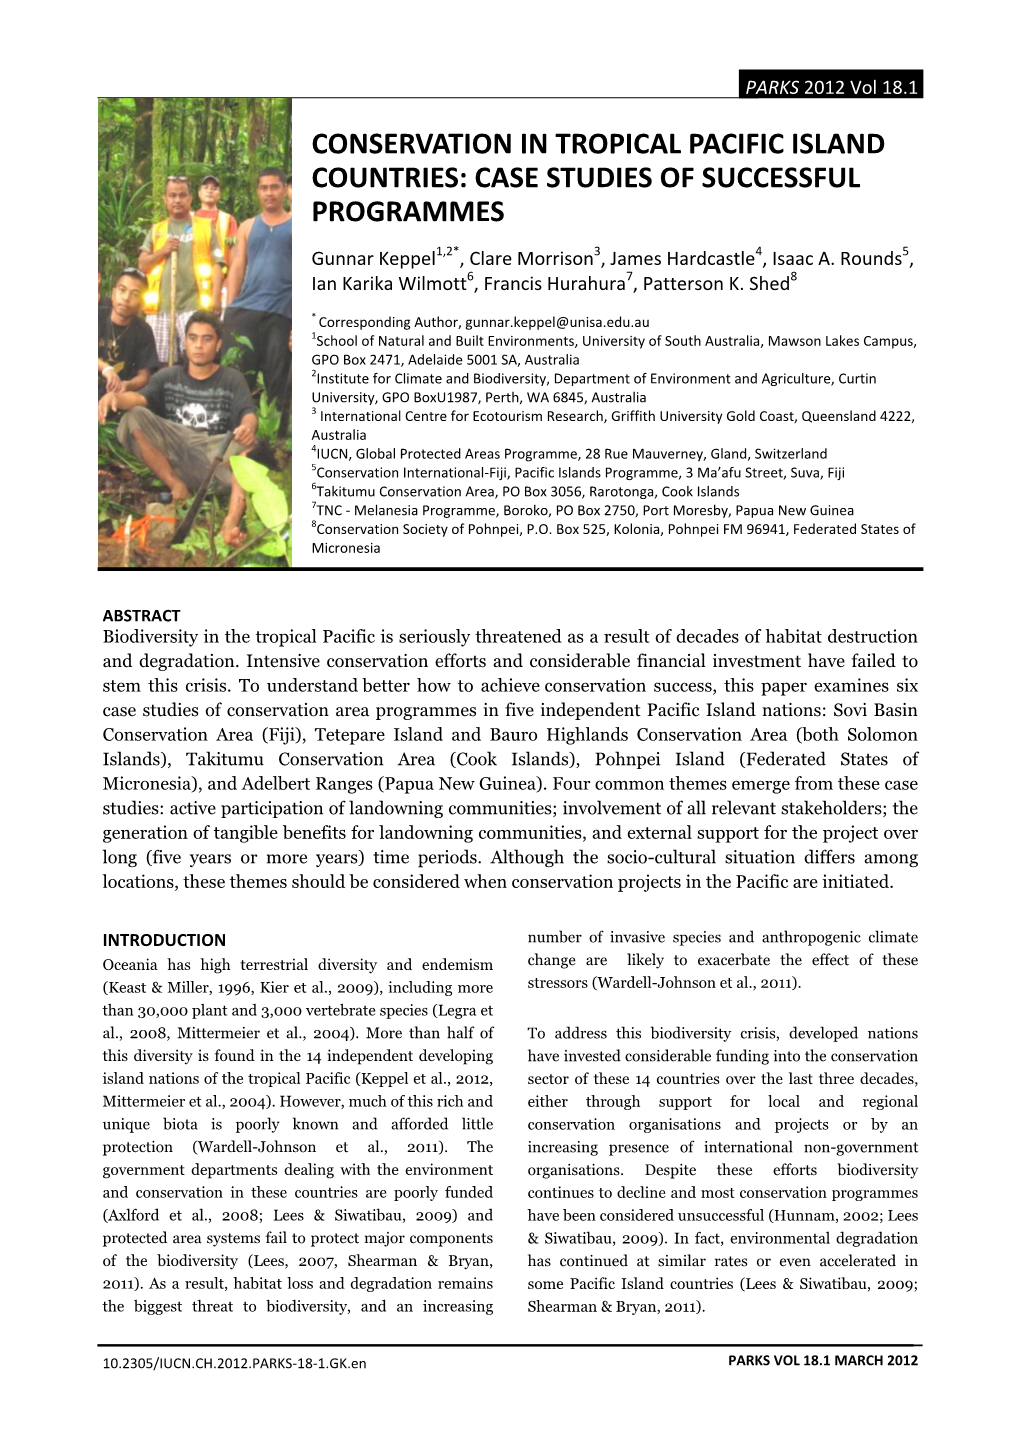 Conservation in Tropical Pacific Island Countries: Case Studies of Successful Programmes